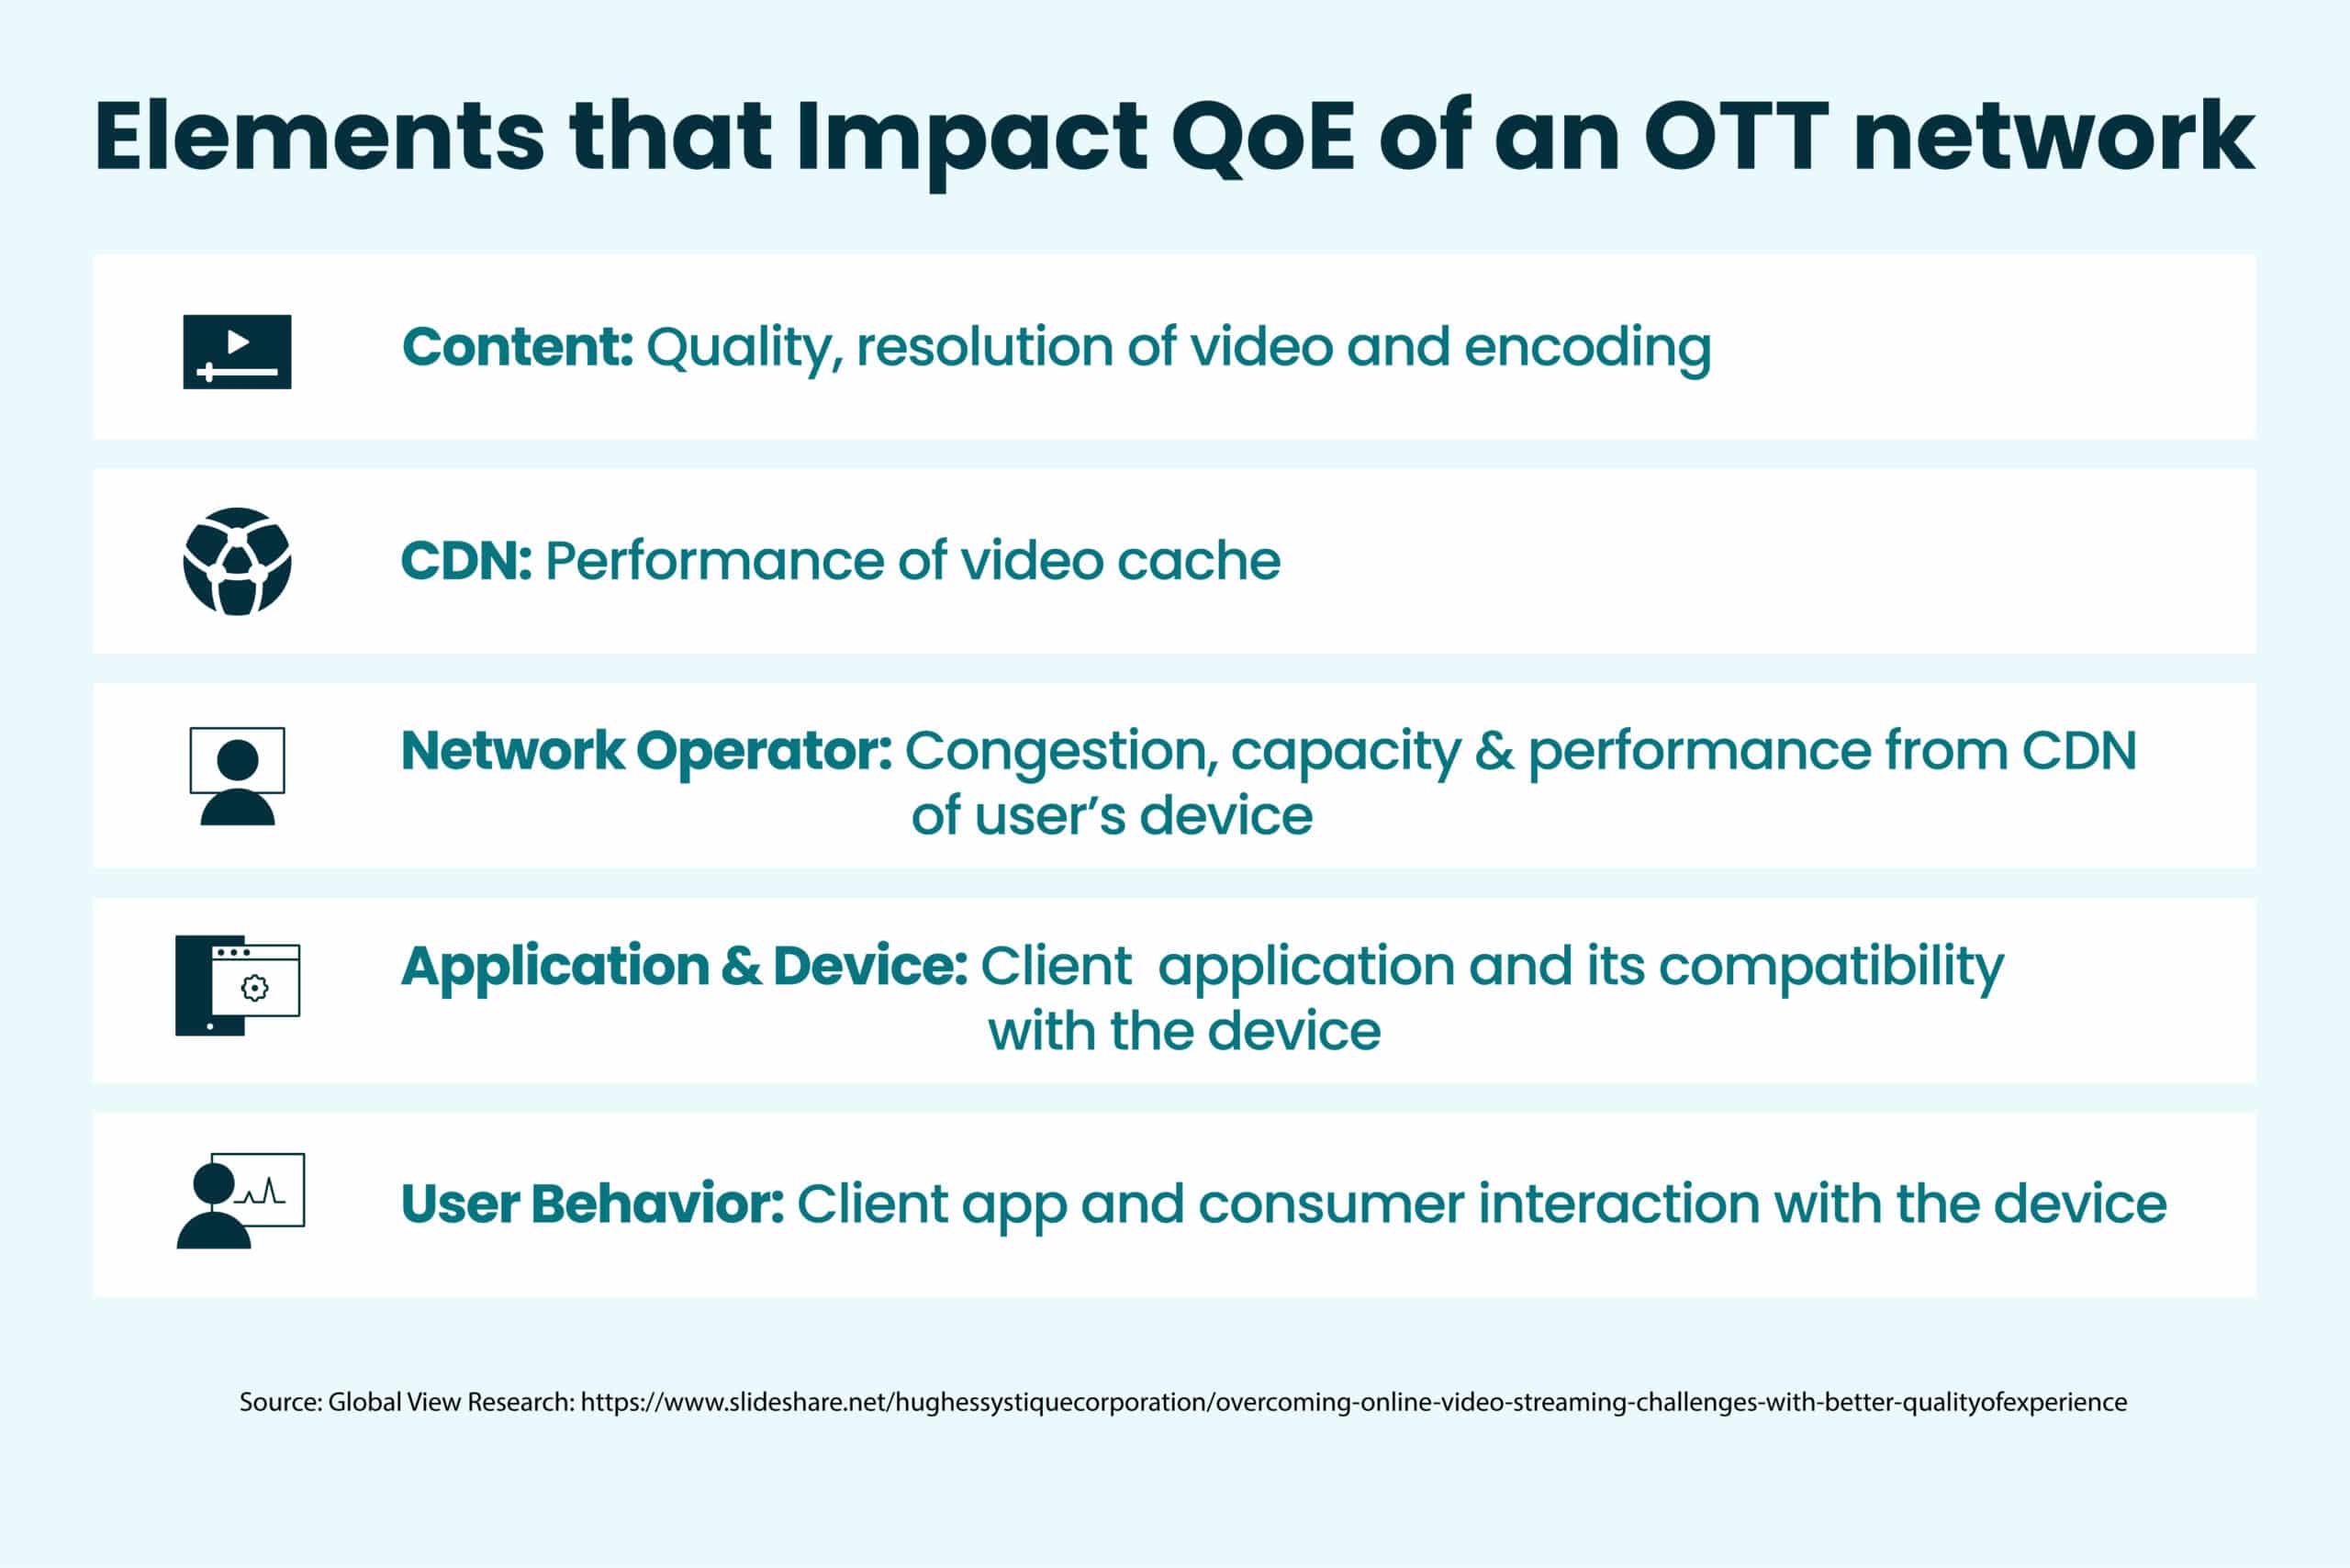 Many factors influence QoE, and Conviva measures the entire experience.